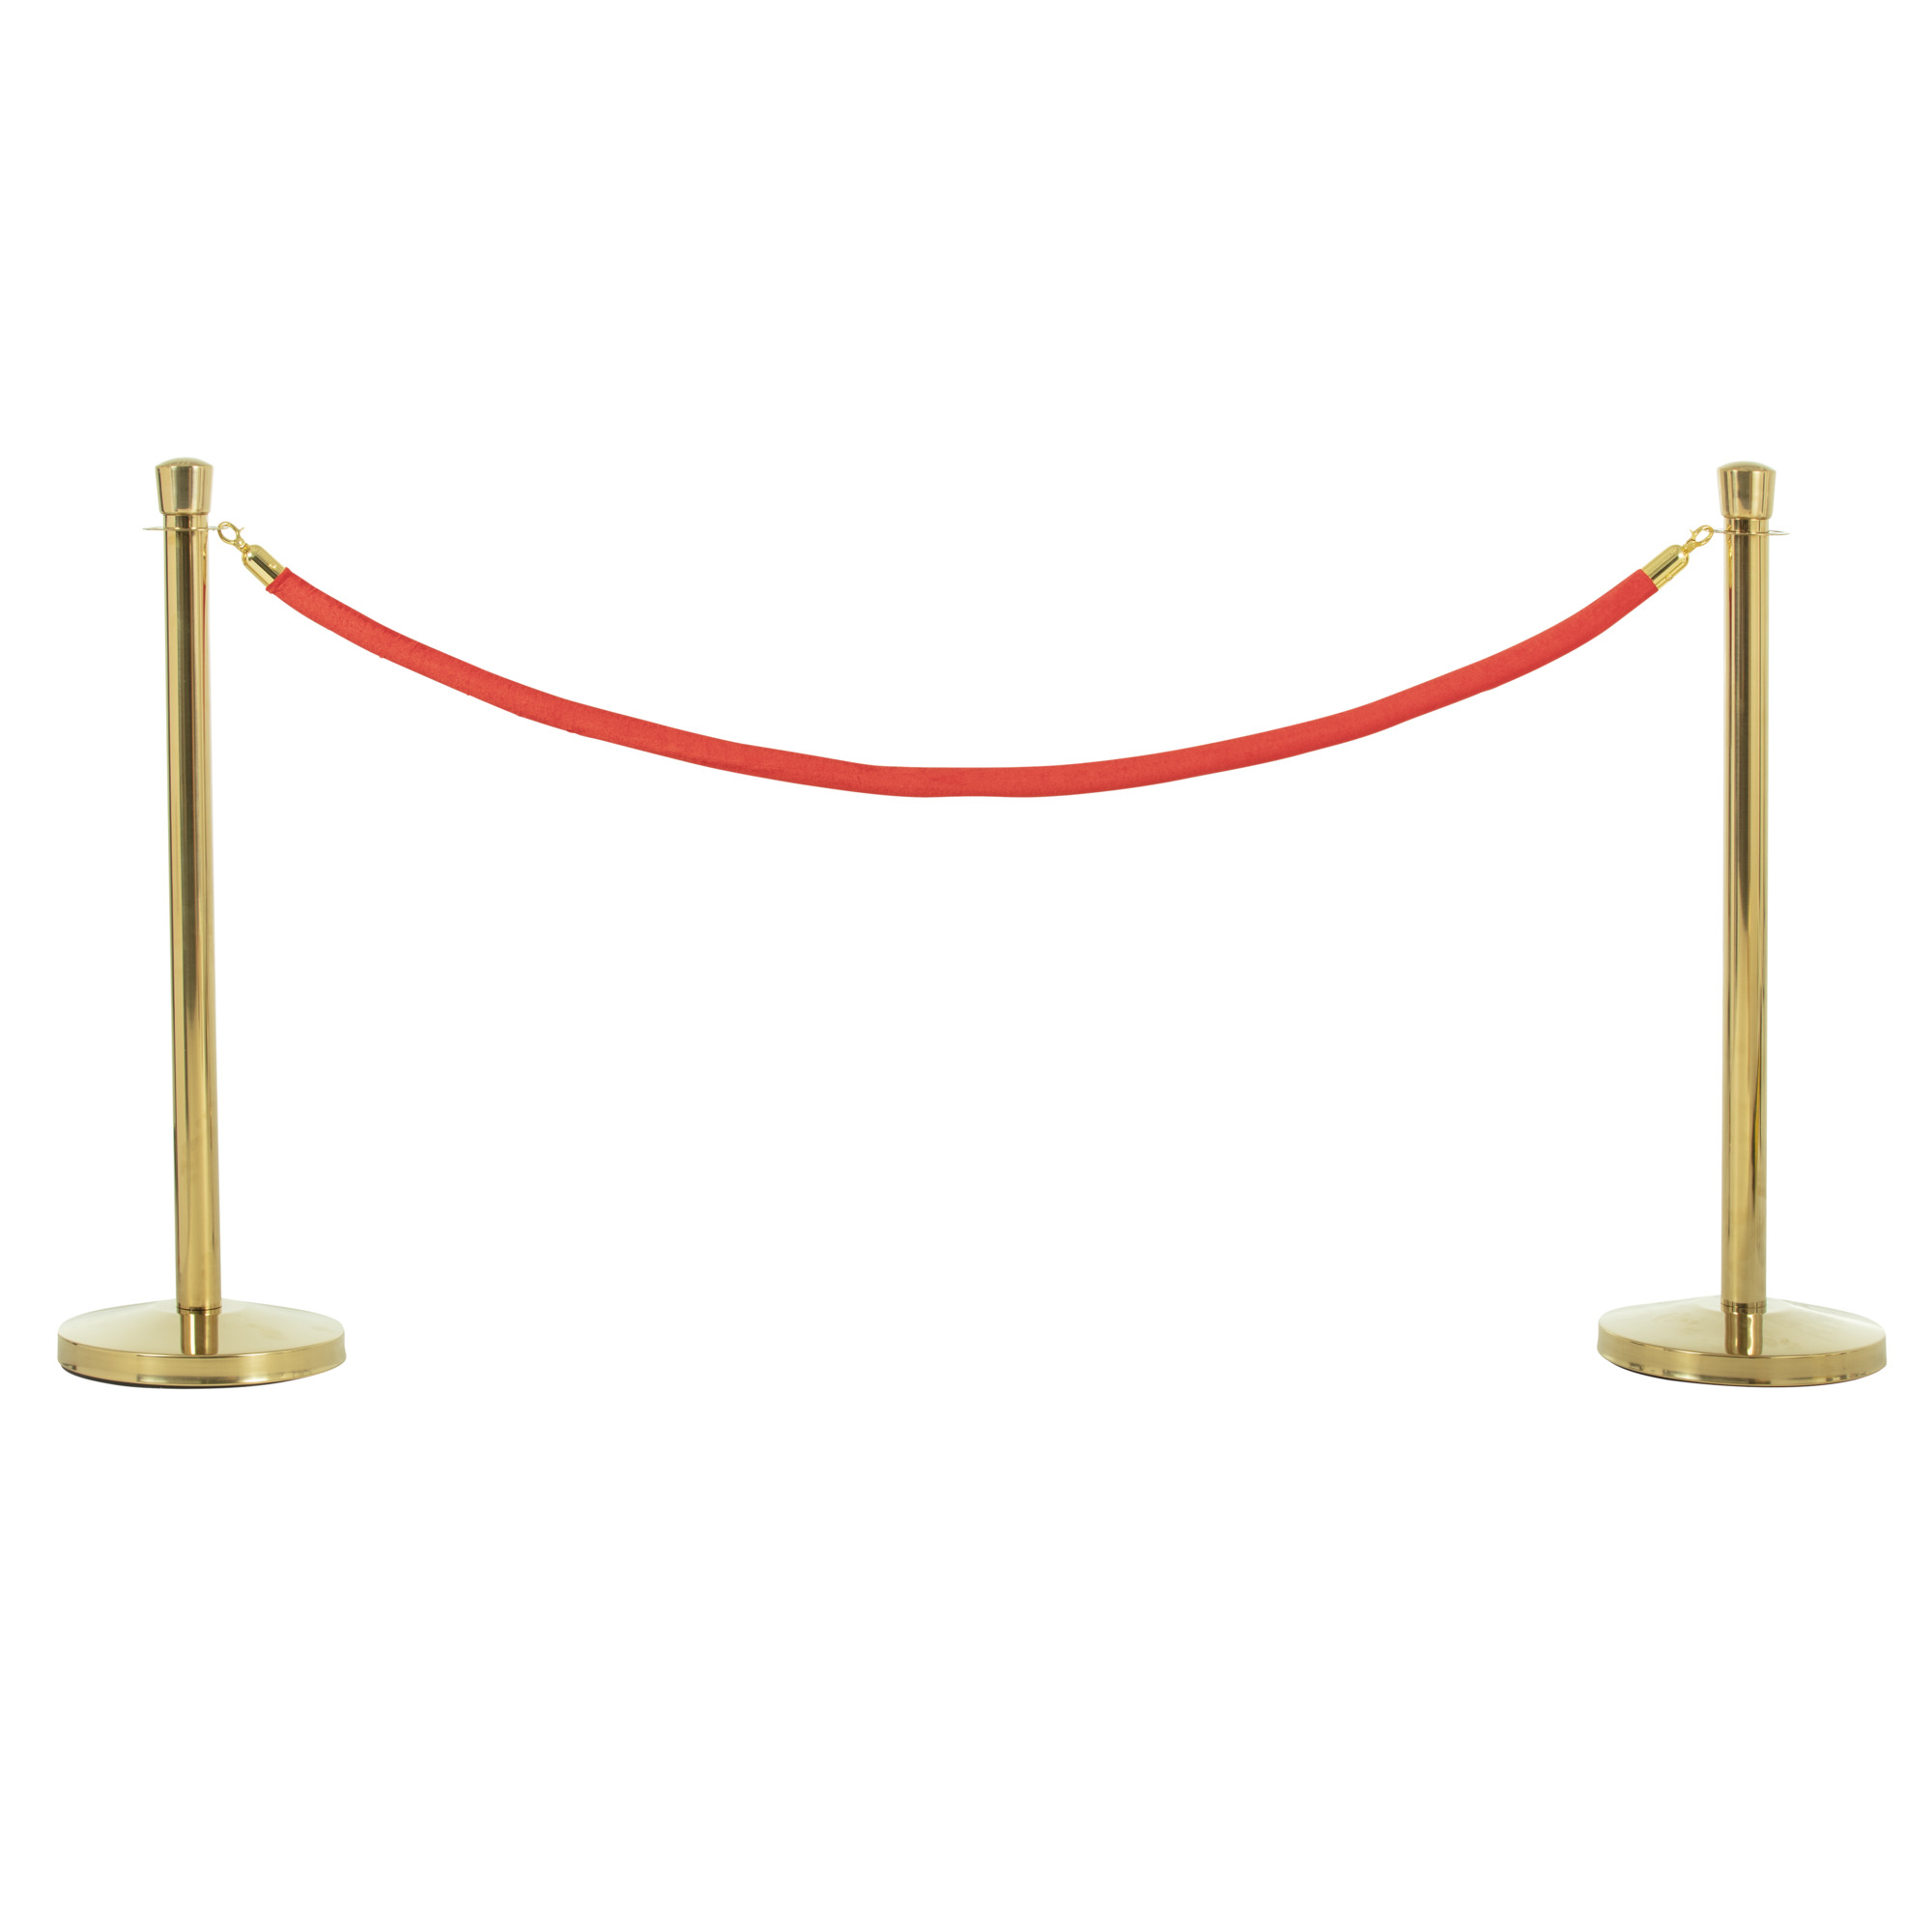 US Weight, Brass Stanchion - 2 pack and 6ft. Rede Rope, Model U2141